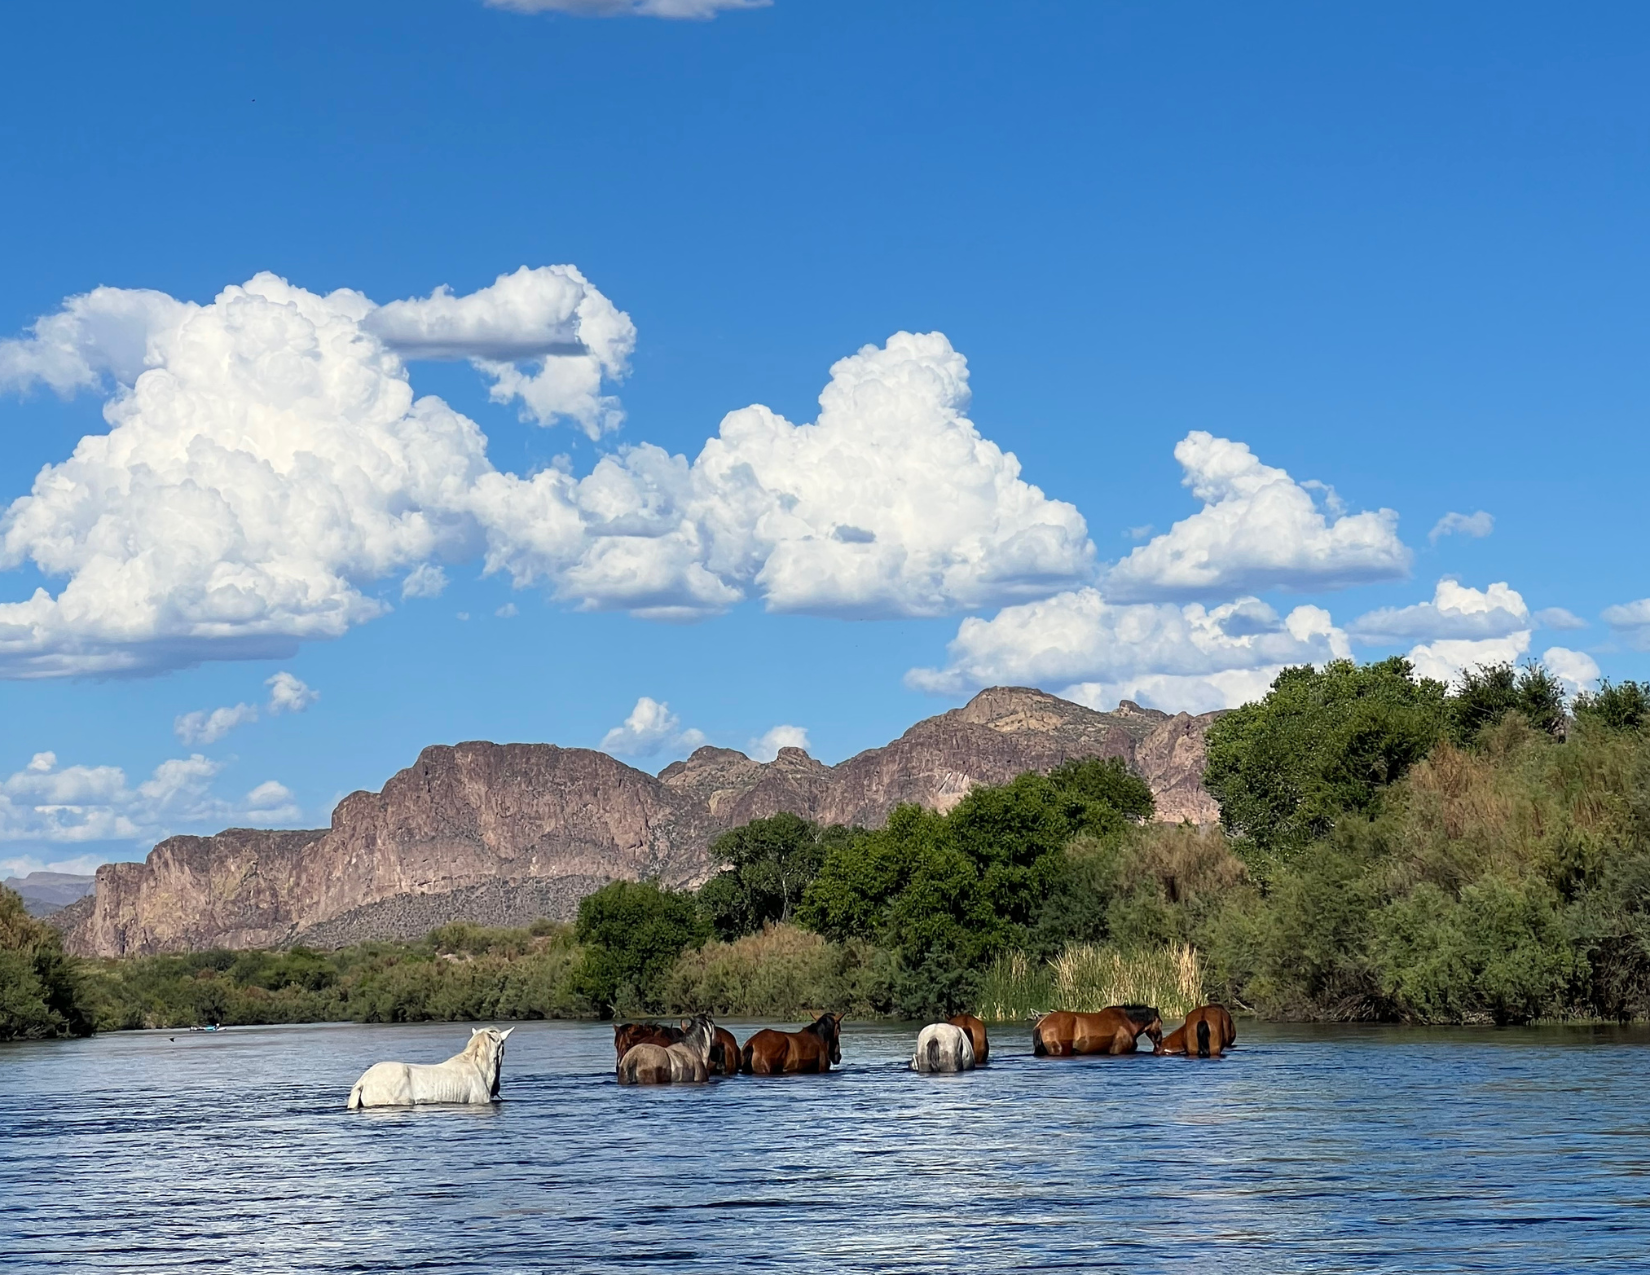 Wild horses bathing in the Salt River in Mesa, Arizona with gorgeous tan mountains and cumulus clouds in the background